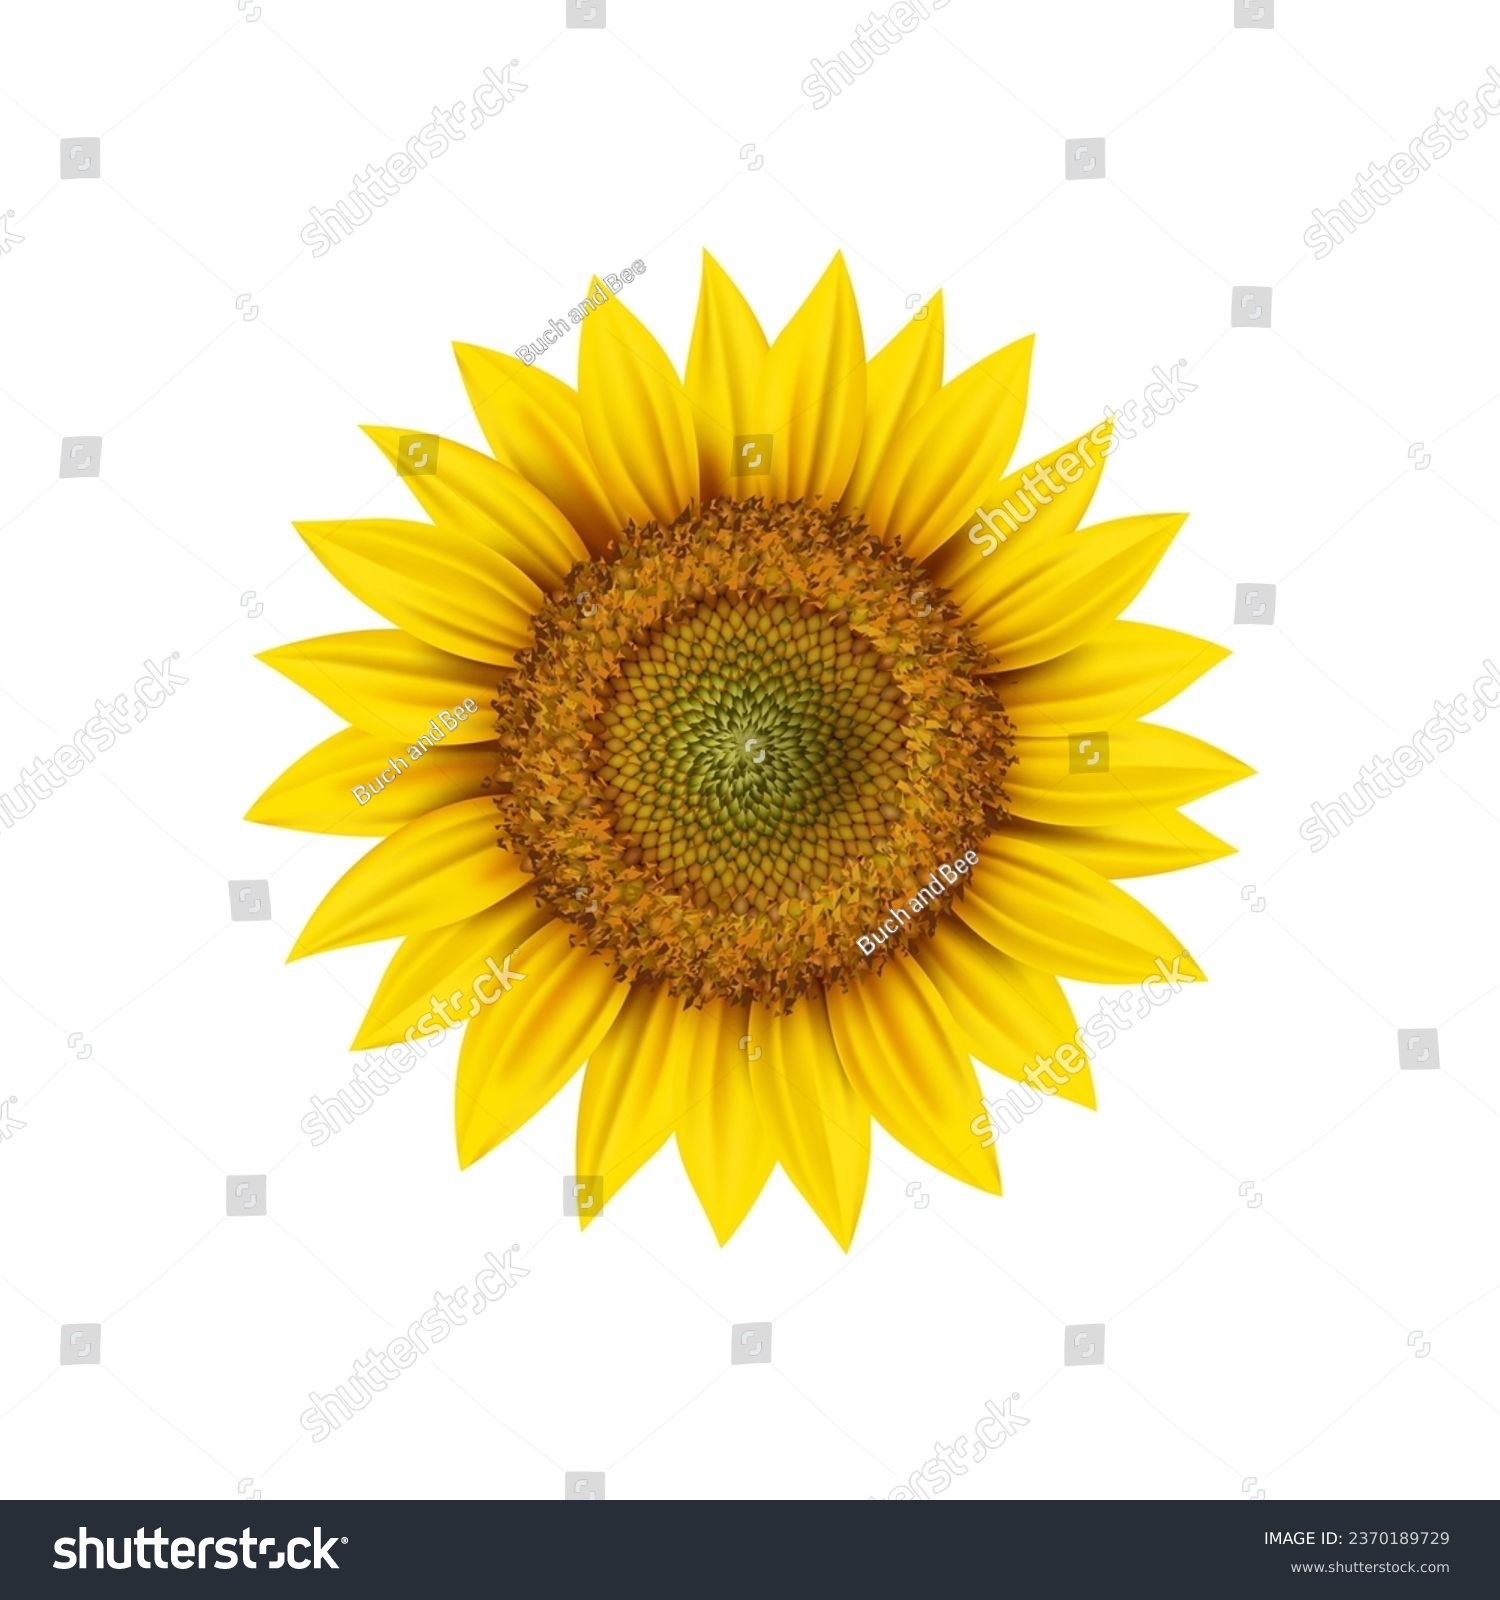 SVG of Realistic sunflower head, isolated 3d vector round flower bud with yellow petals and seeds inside close up view. Garden plant, source or vegetable oil. Fresh ripe blossom, natural bloom, symbol of sun svg